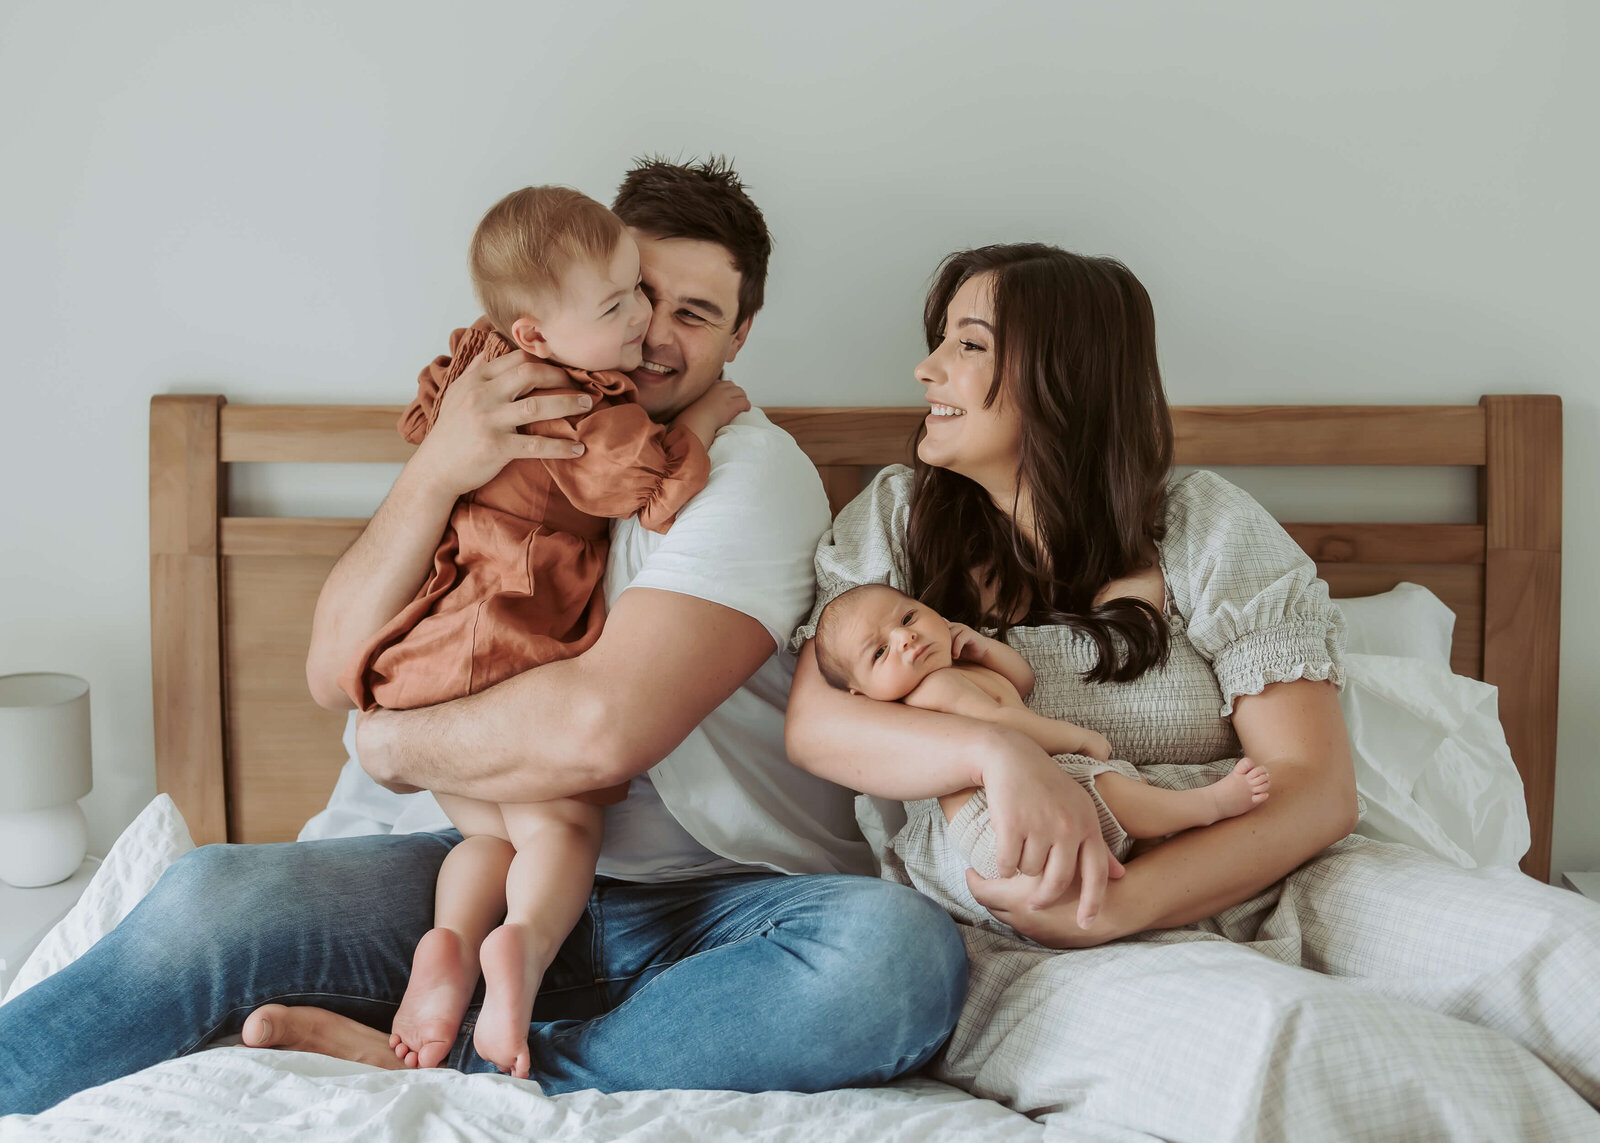 Everyone is on the bed and dad is holding his daughter who is standing with her arms around her neck and mum is looking at them with love while cradling her new baby son in her arms.